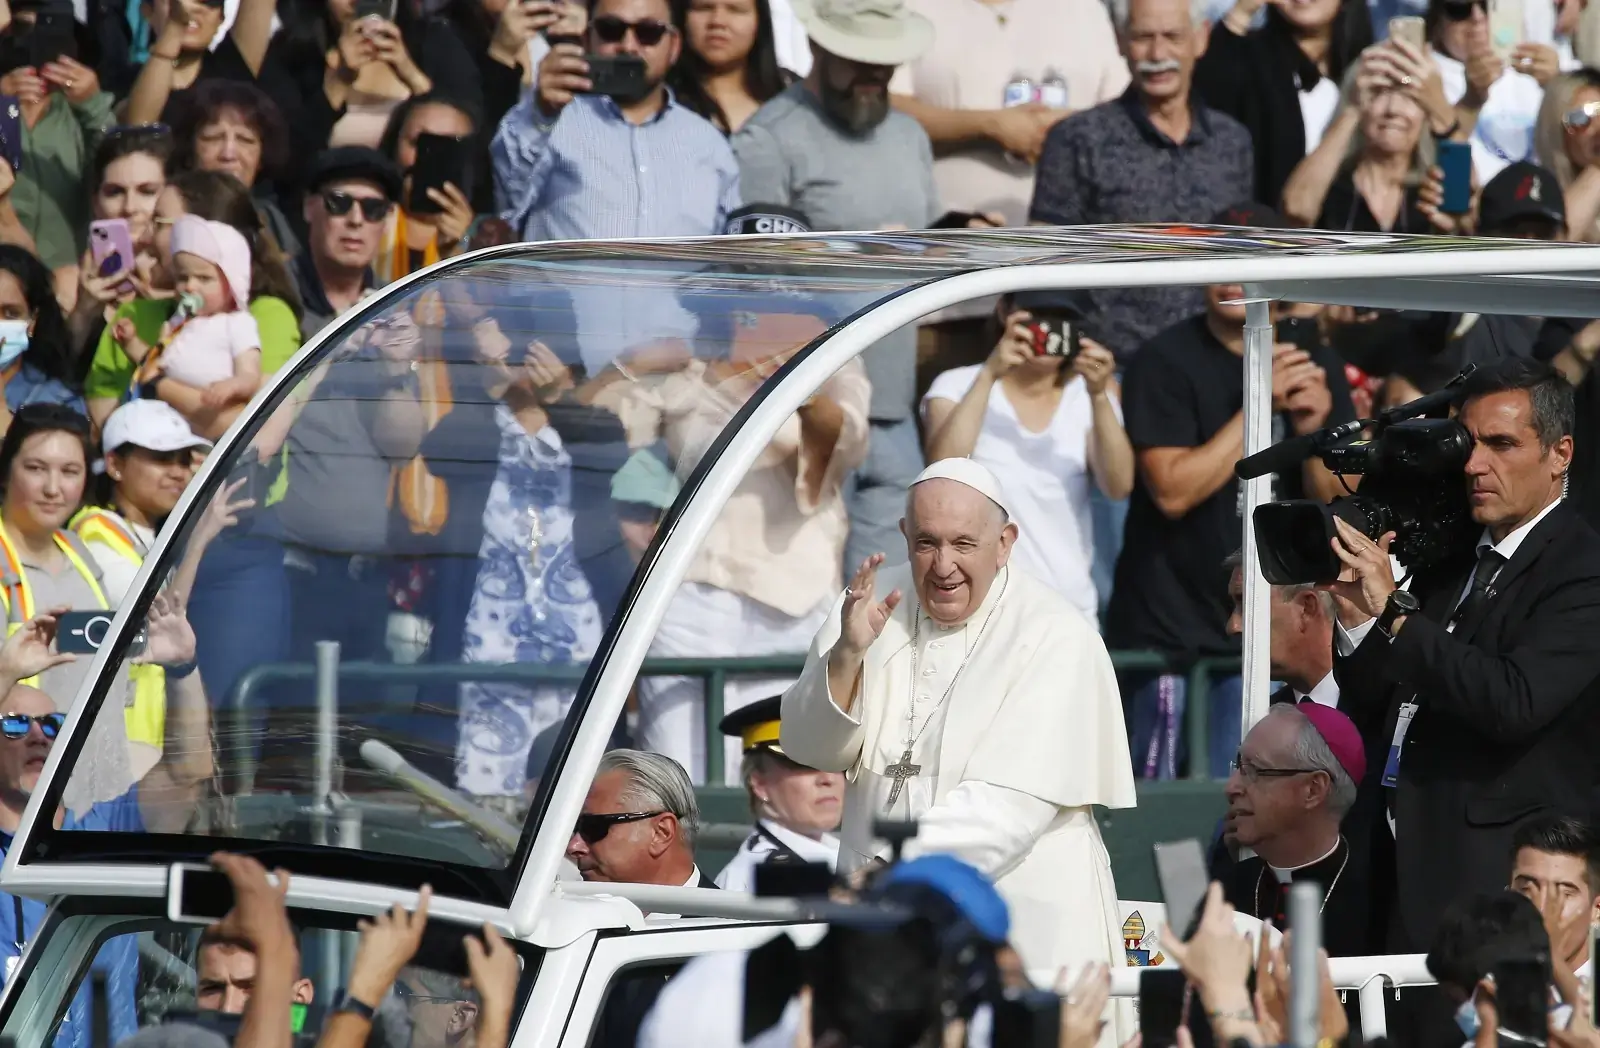 Pope Francis greets the crowd before celebrating Mass at Commonwealth Stadium in Edmonton, Alberta